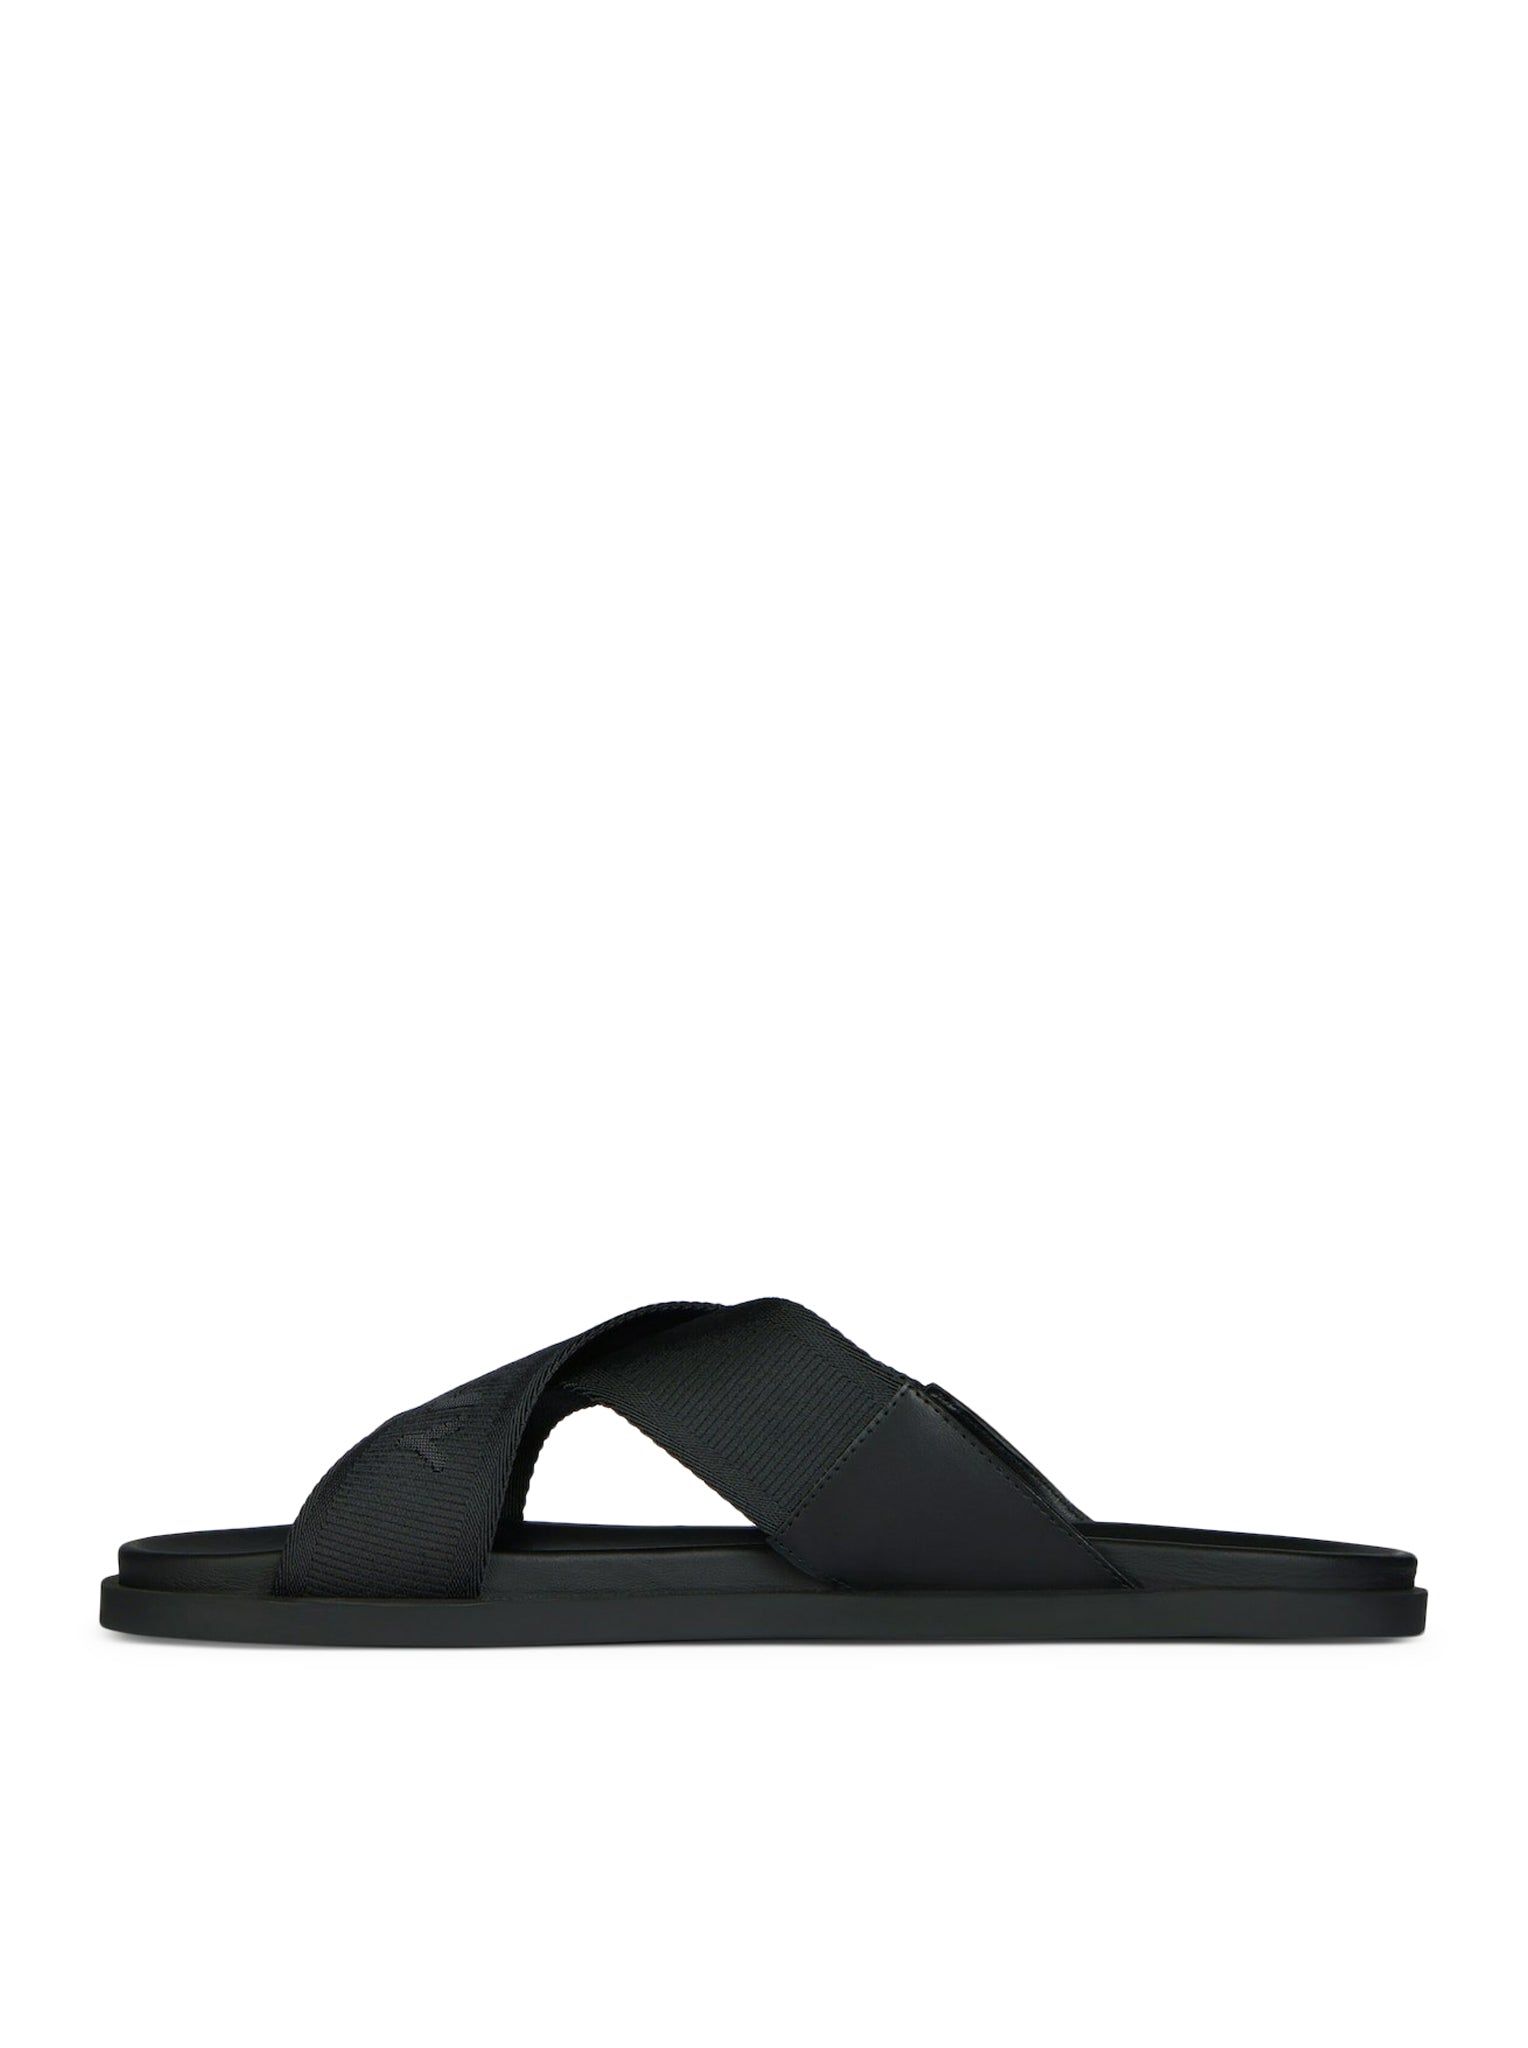 G Plage flat sandals with crossed webbing bands